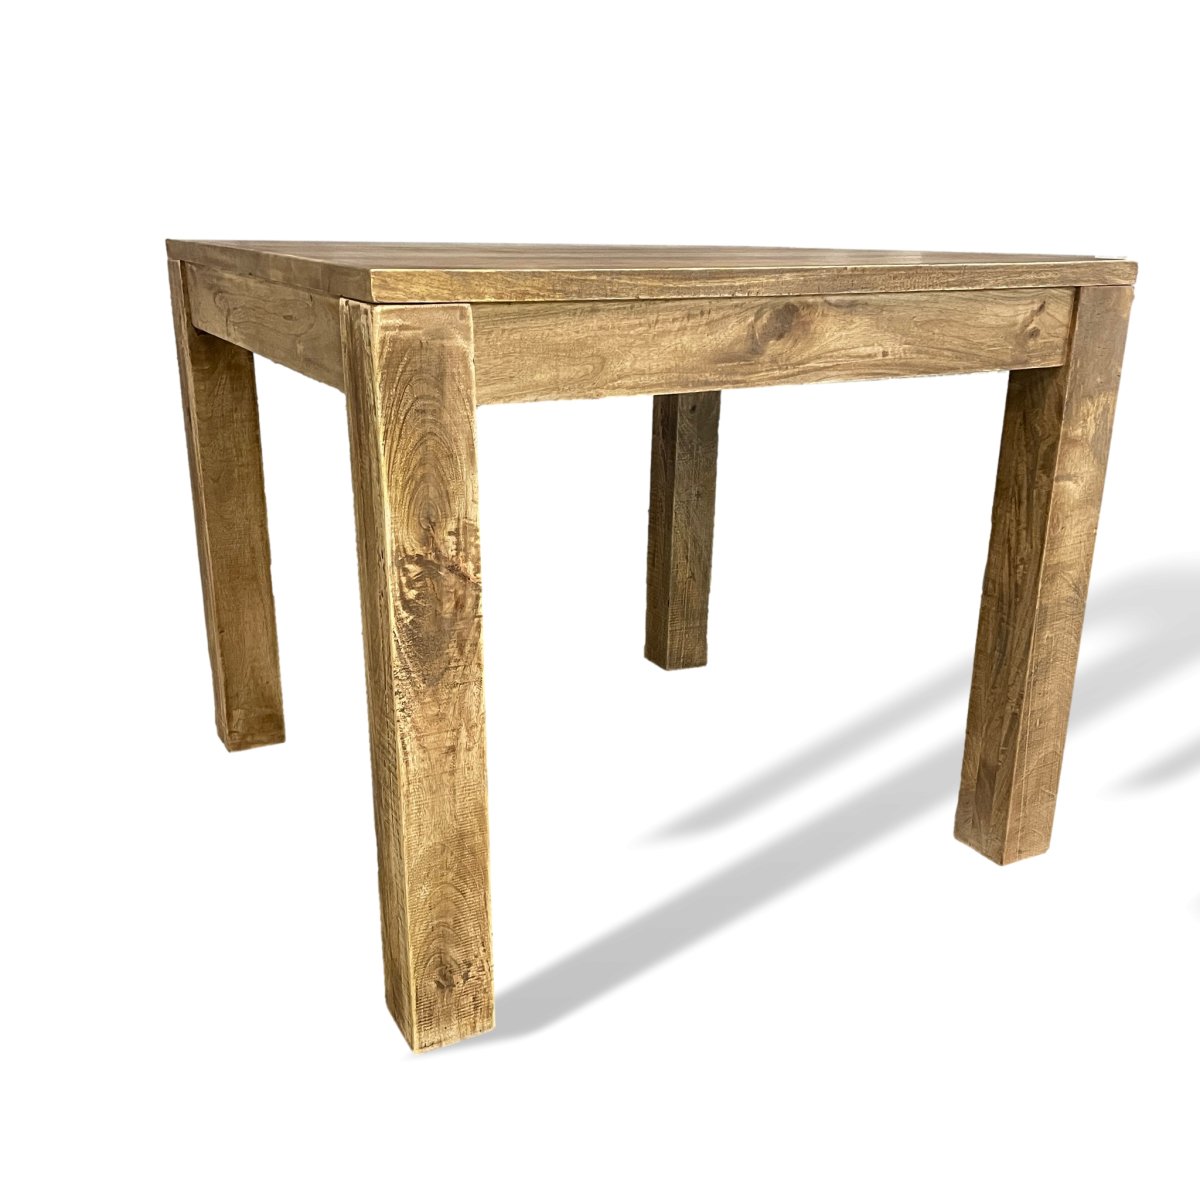 35 inch square pub style dining table - Rustic Furniture Outlet